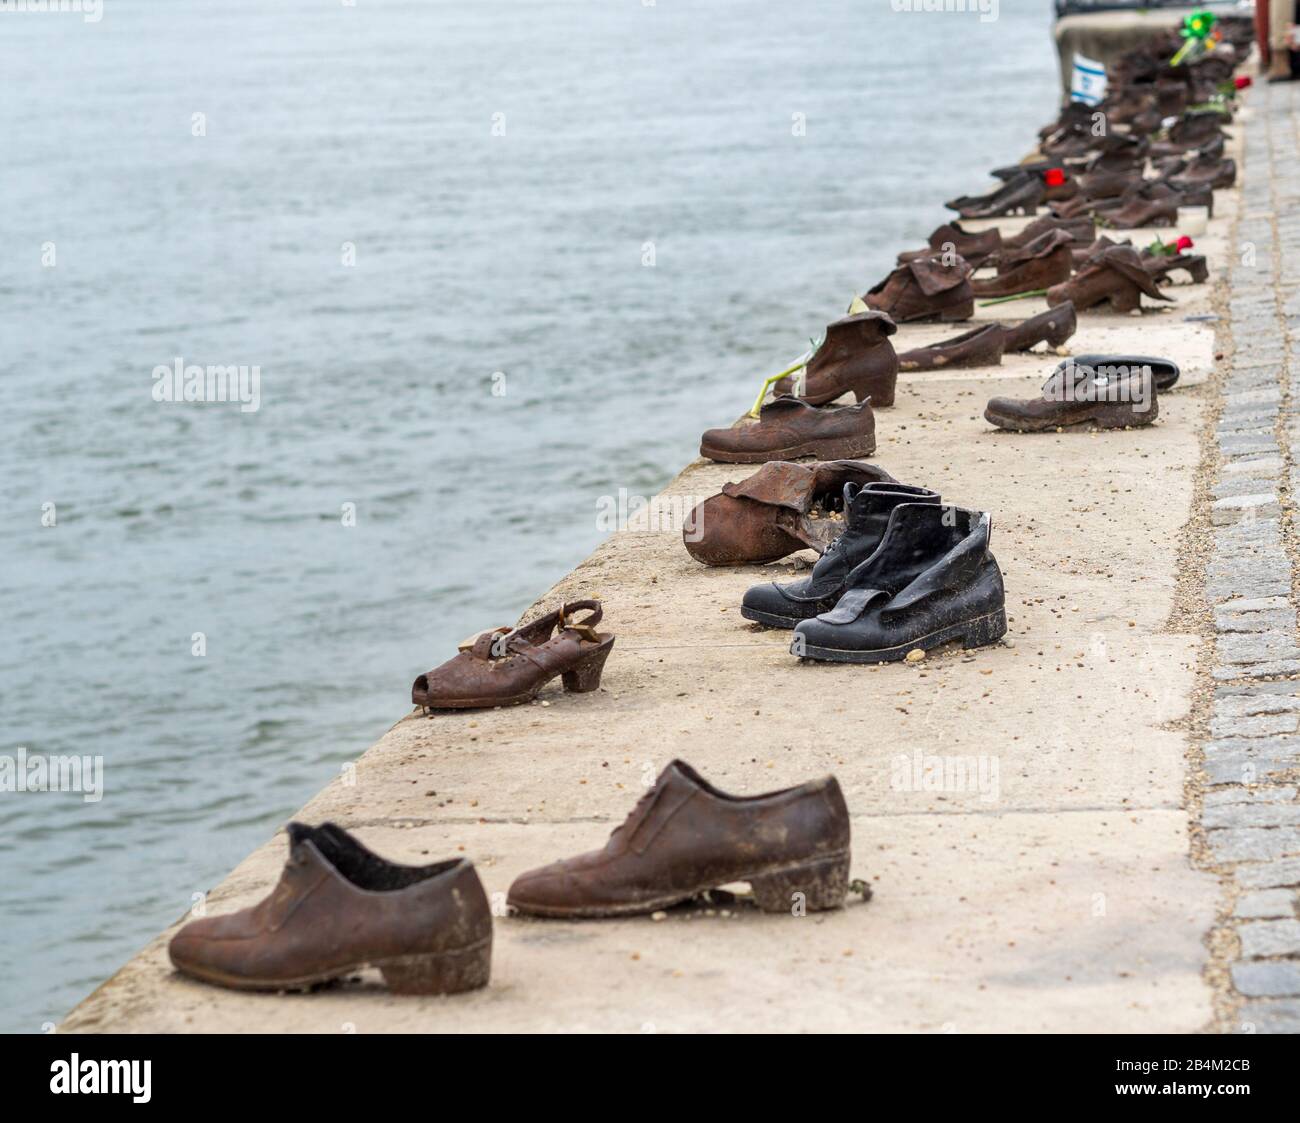 Overview of the Danube Shoe Memorial: Iron sculpture of shoes along the Danube embankment. To the memory of the victims shot into the Danube by Arrow Cross militiamen in 1944–45. Concieved by Can Togay and sculpted and erected 16 April 2005 by Gyula Pauer. Stock Photo